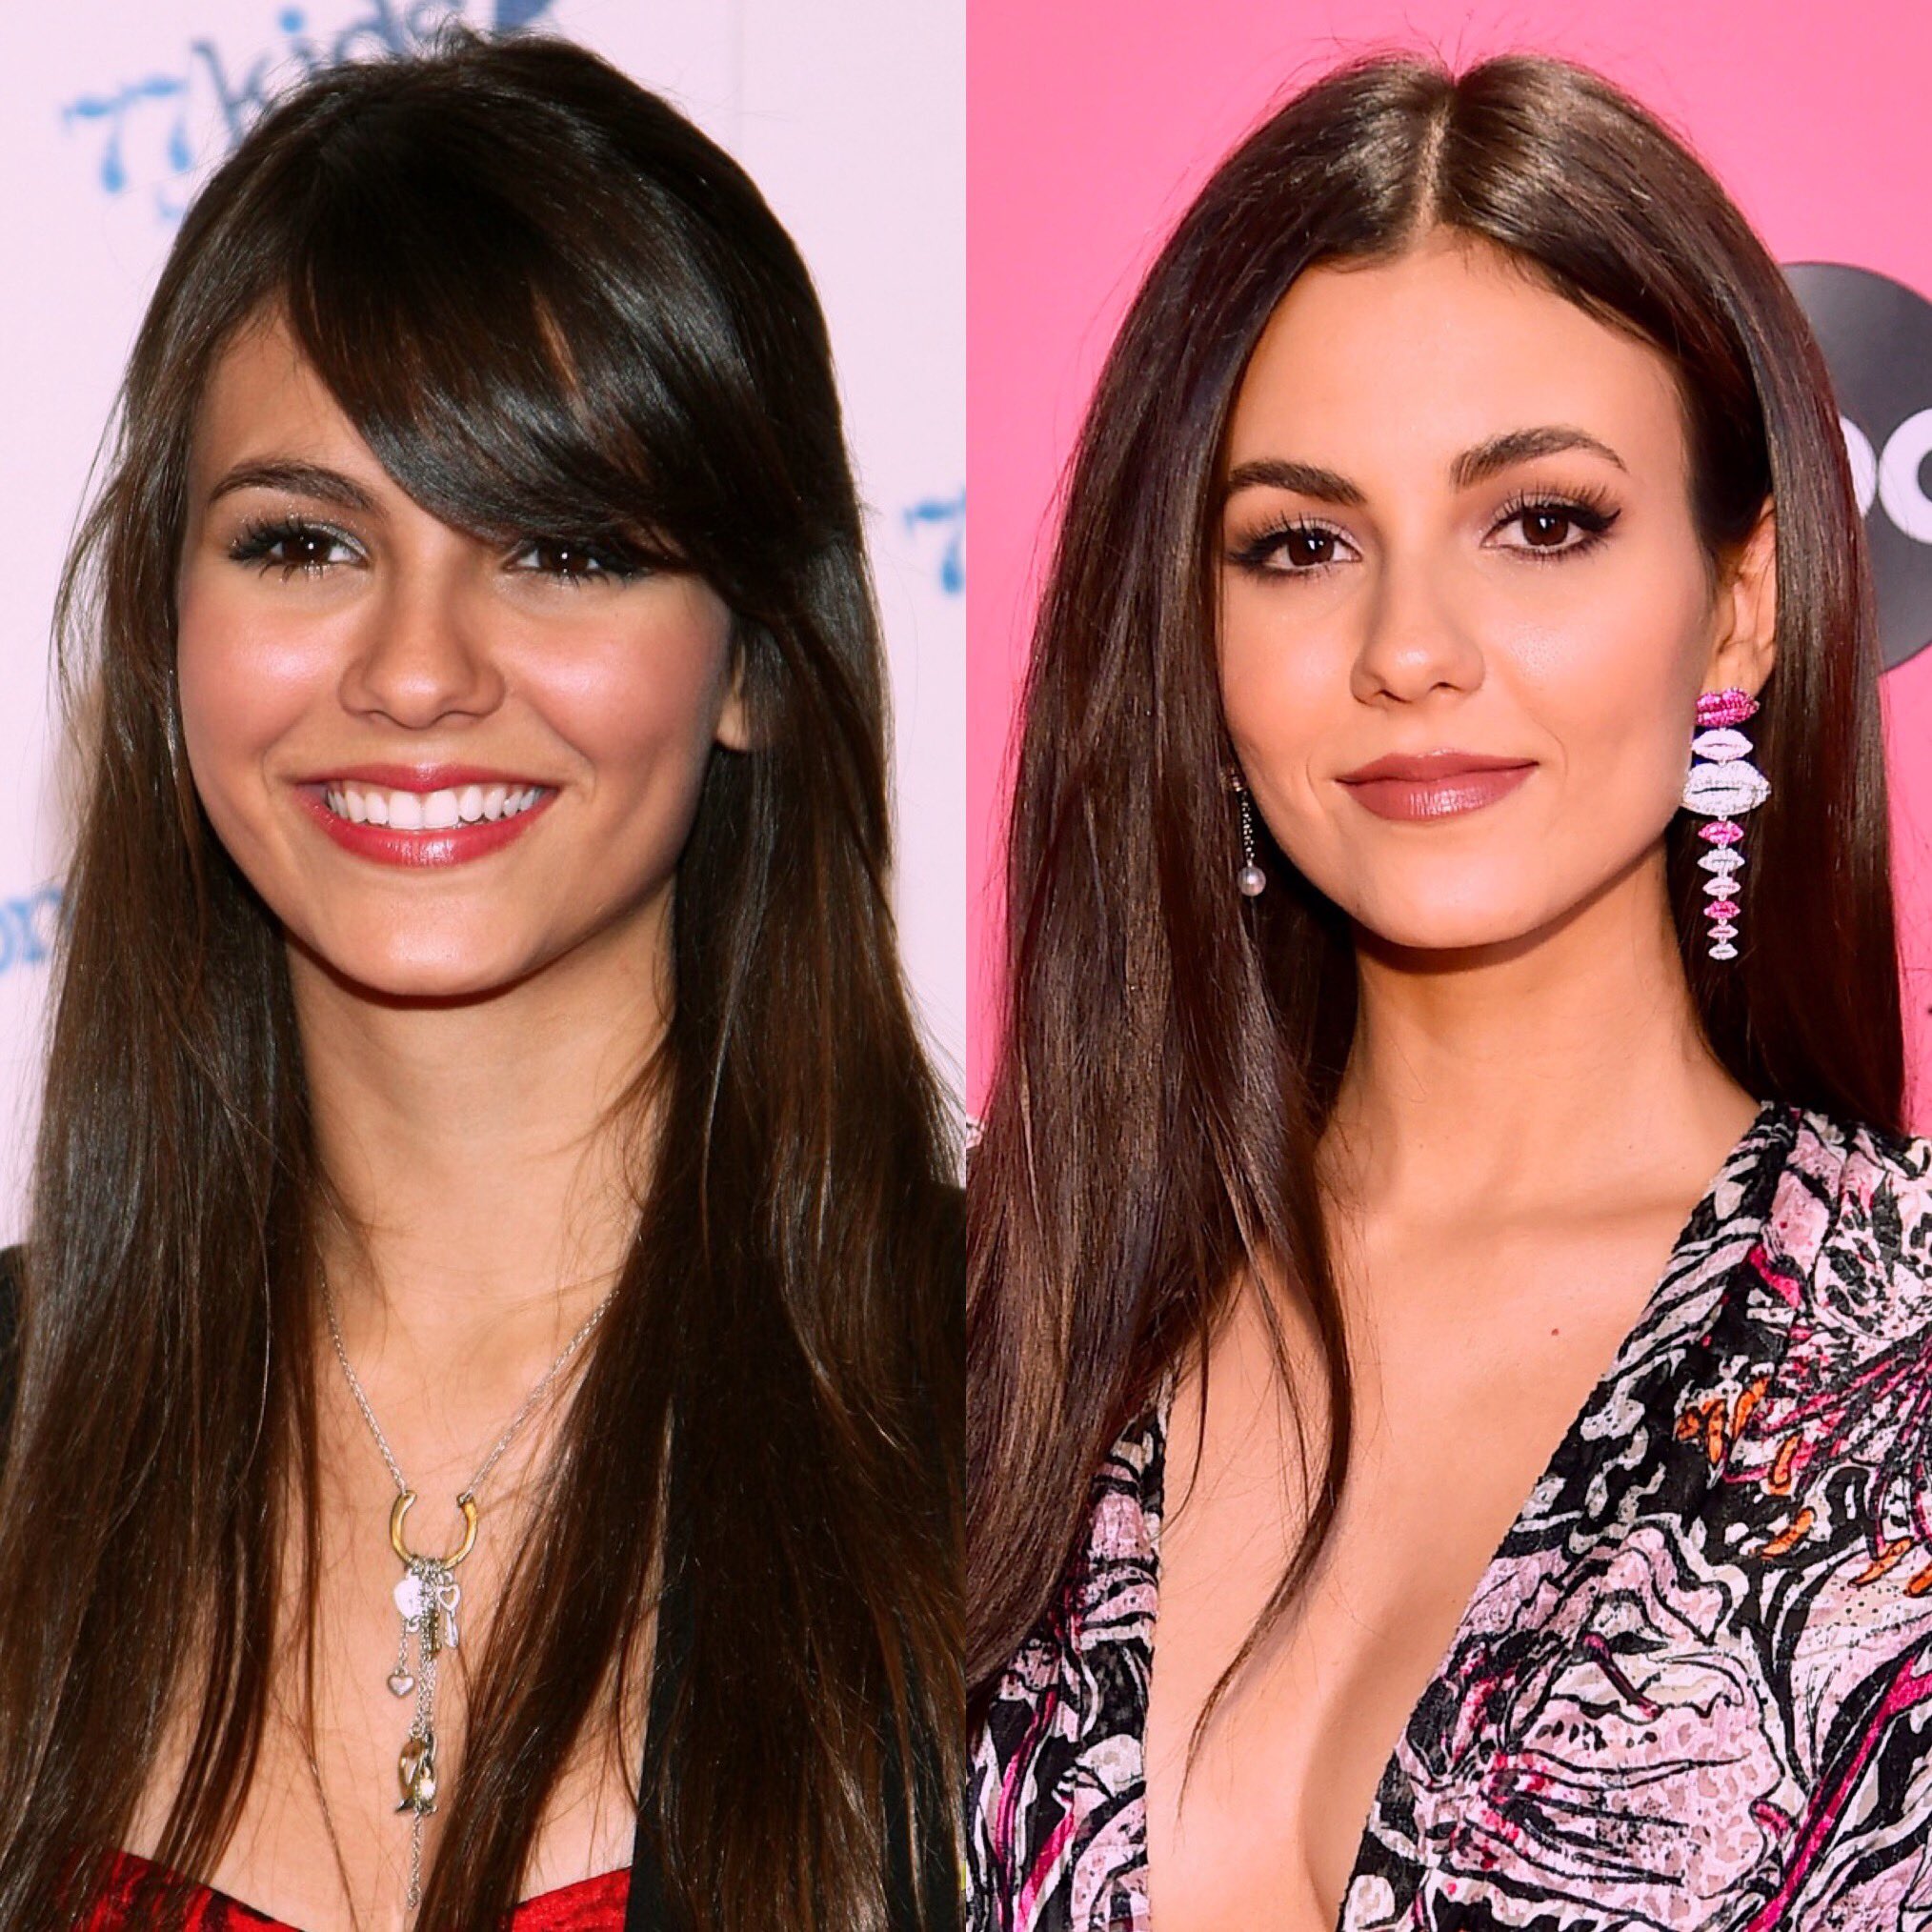 Victoria Justice on Twitter: "little Vic 💗 #10yearchallenge. from pbs...